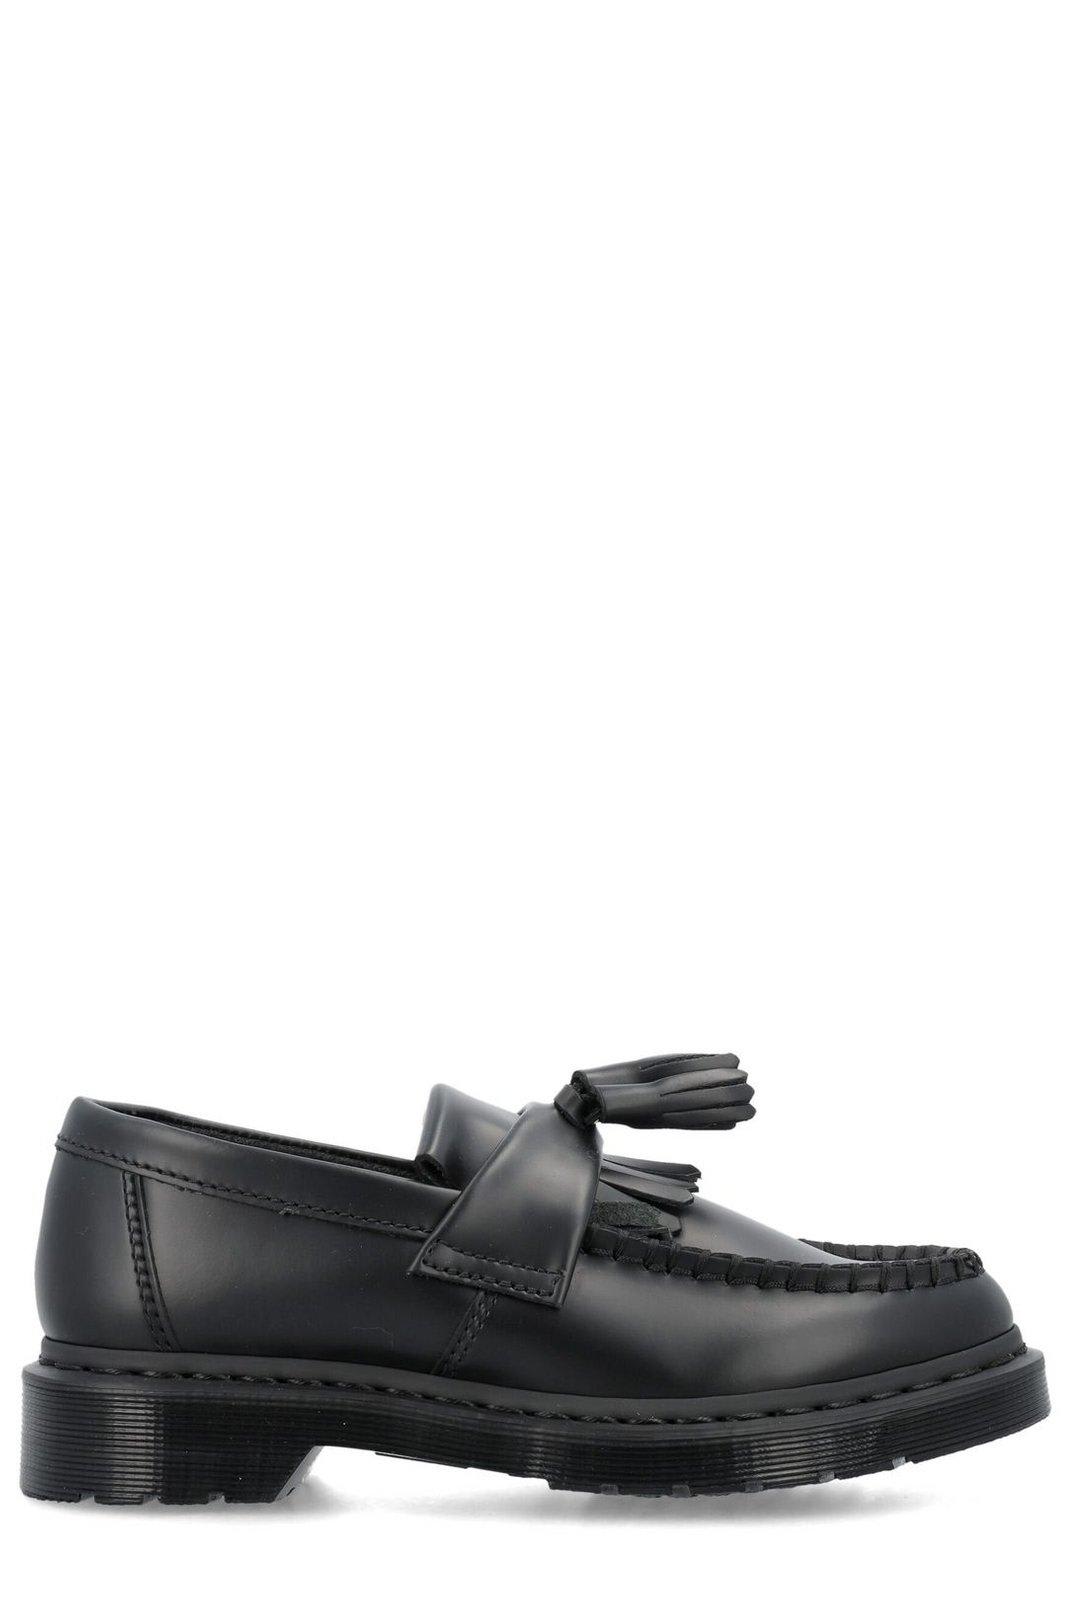 Dr. Martens Adrian Mono Smooth Leather Loafers